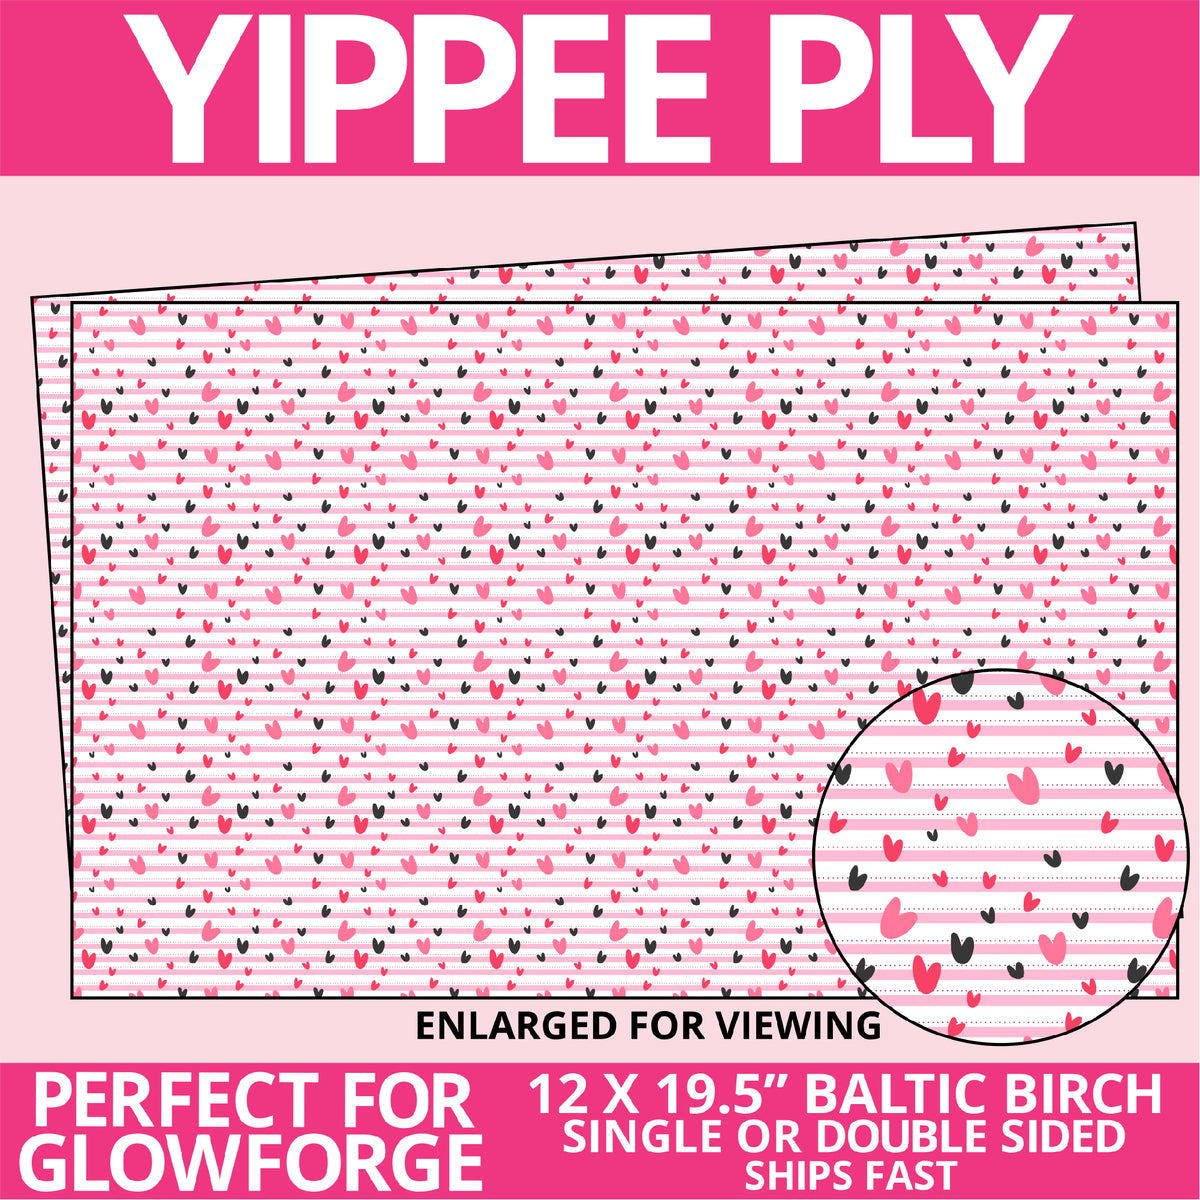 Yippee Ply Love Is In The Air Valentine Pattern on Birch Plywood 1005